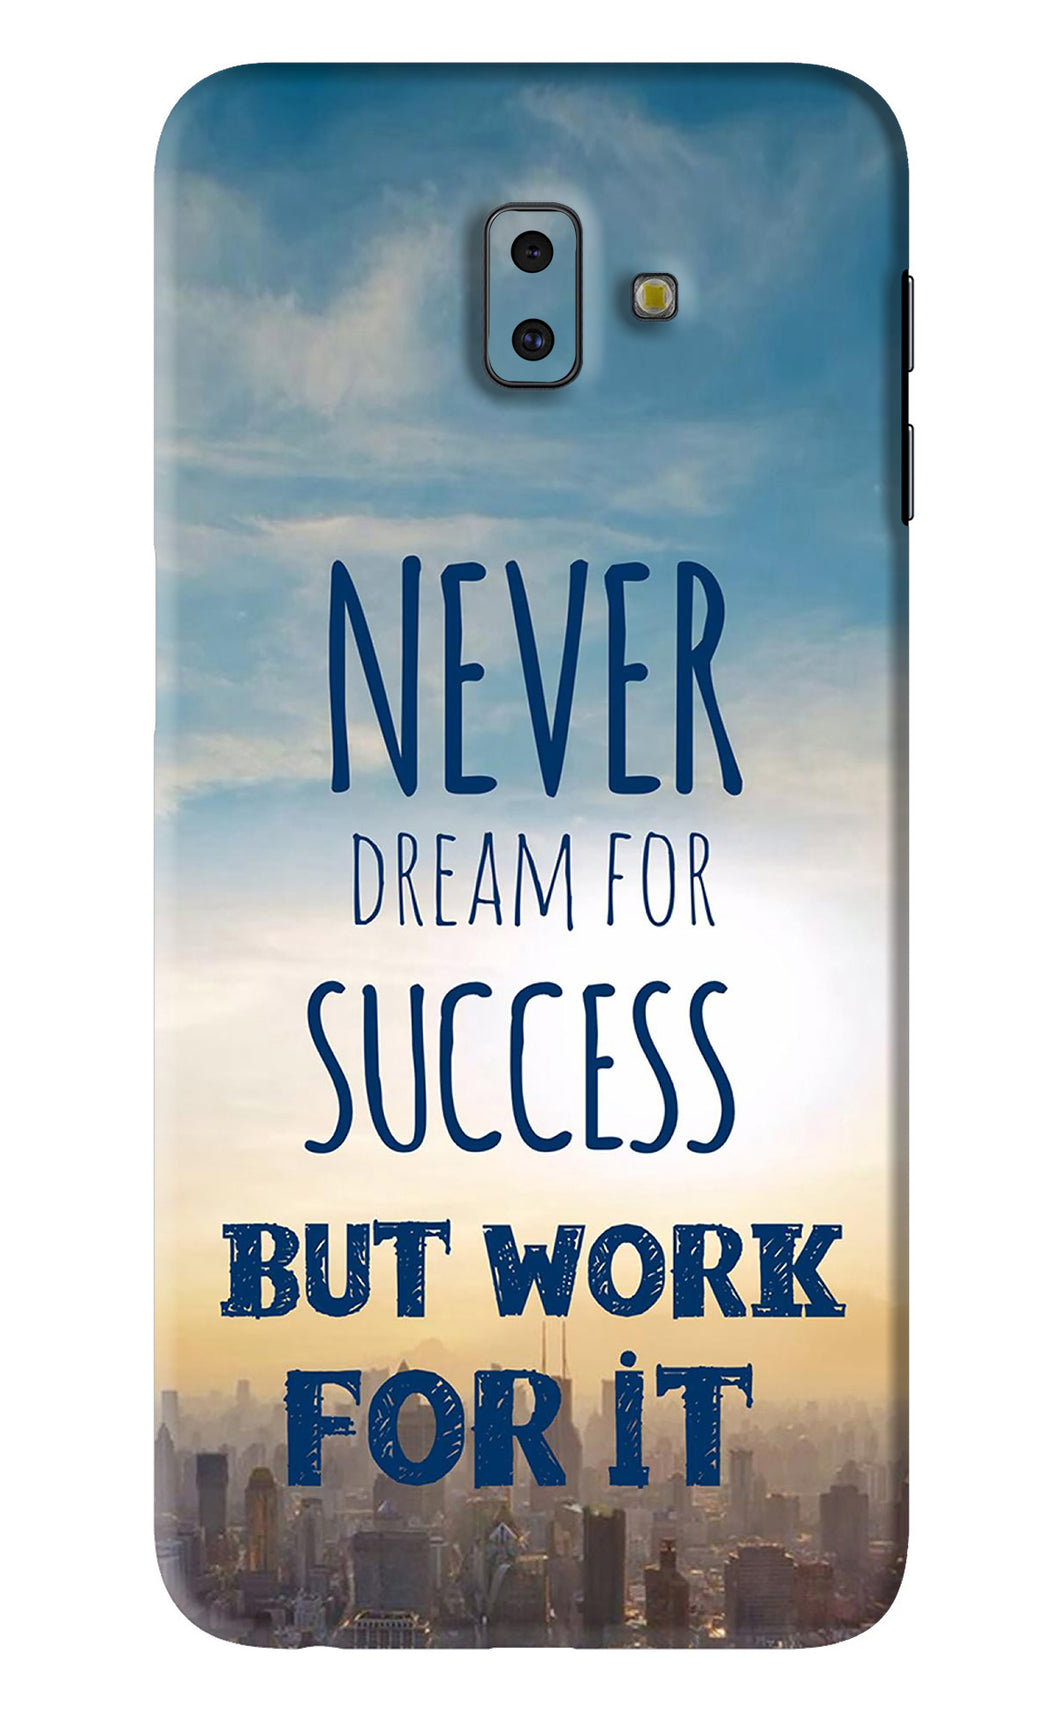 Never Dream For Success But Work For It Samsung Galaxy J6 Plus Back Skin Wrap